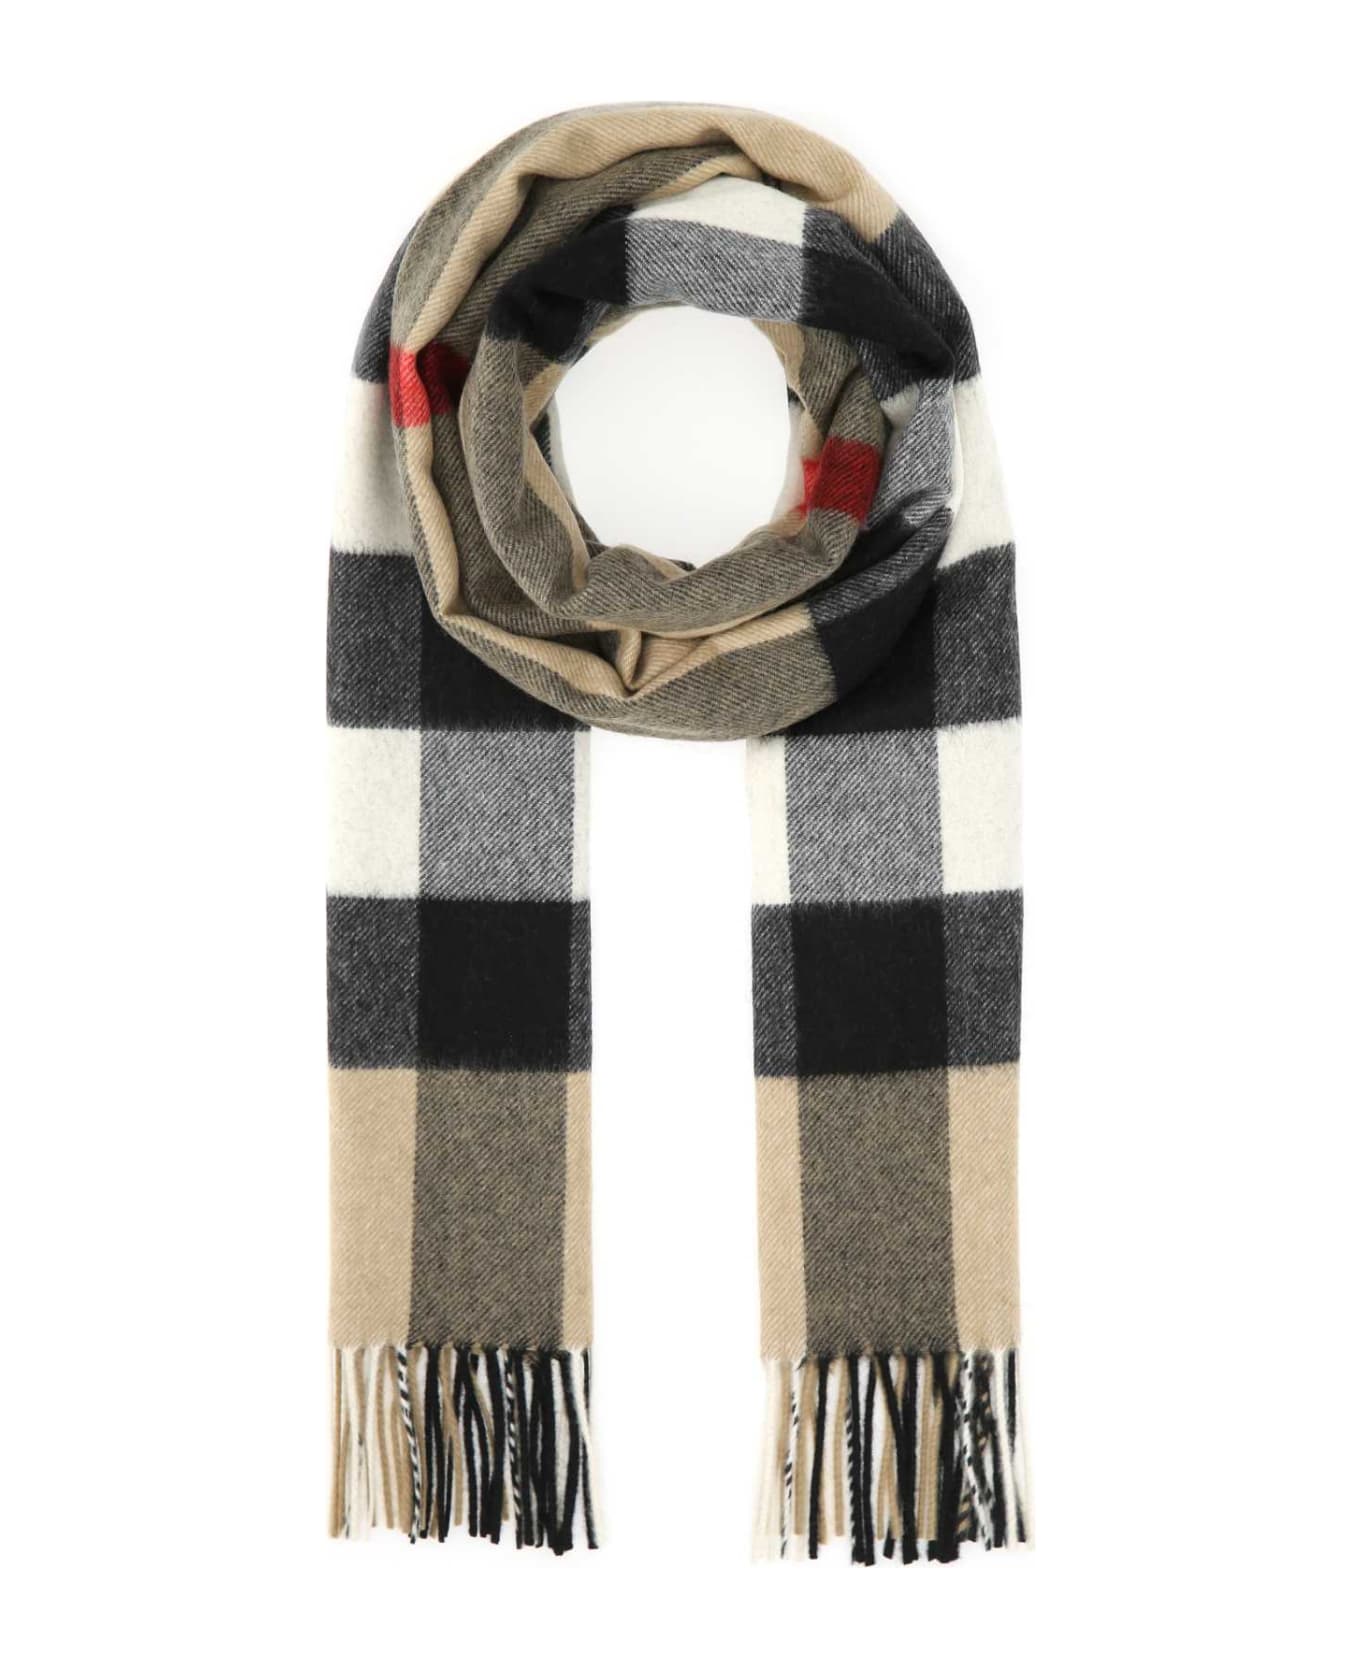 Burberry Embroidered Cashmere Scarf - A7026